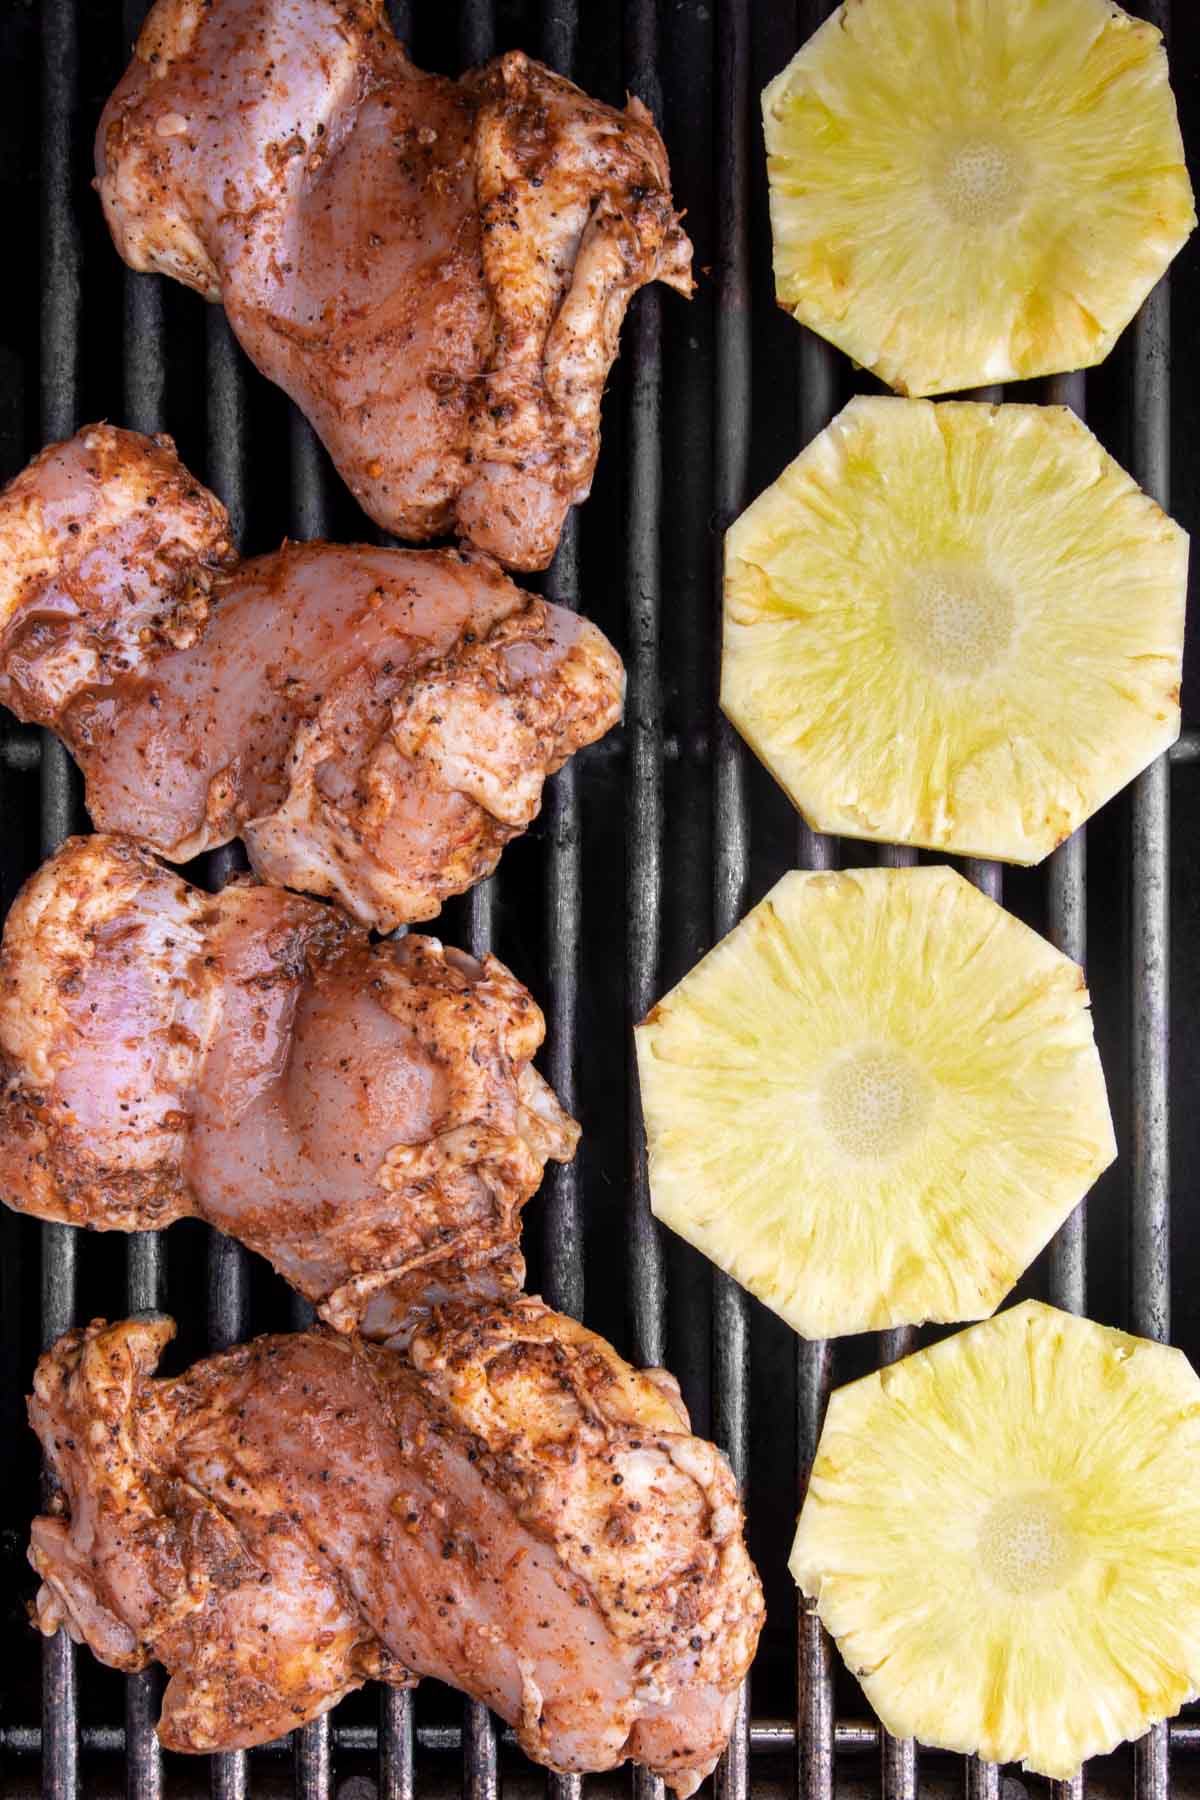 Jerk marinated chicken thighs and pineapple slices on barbecue grate.